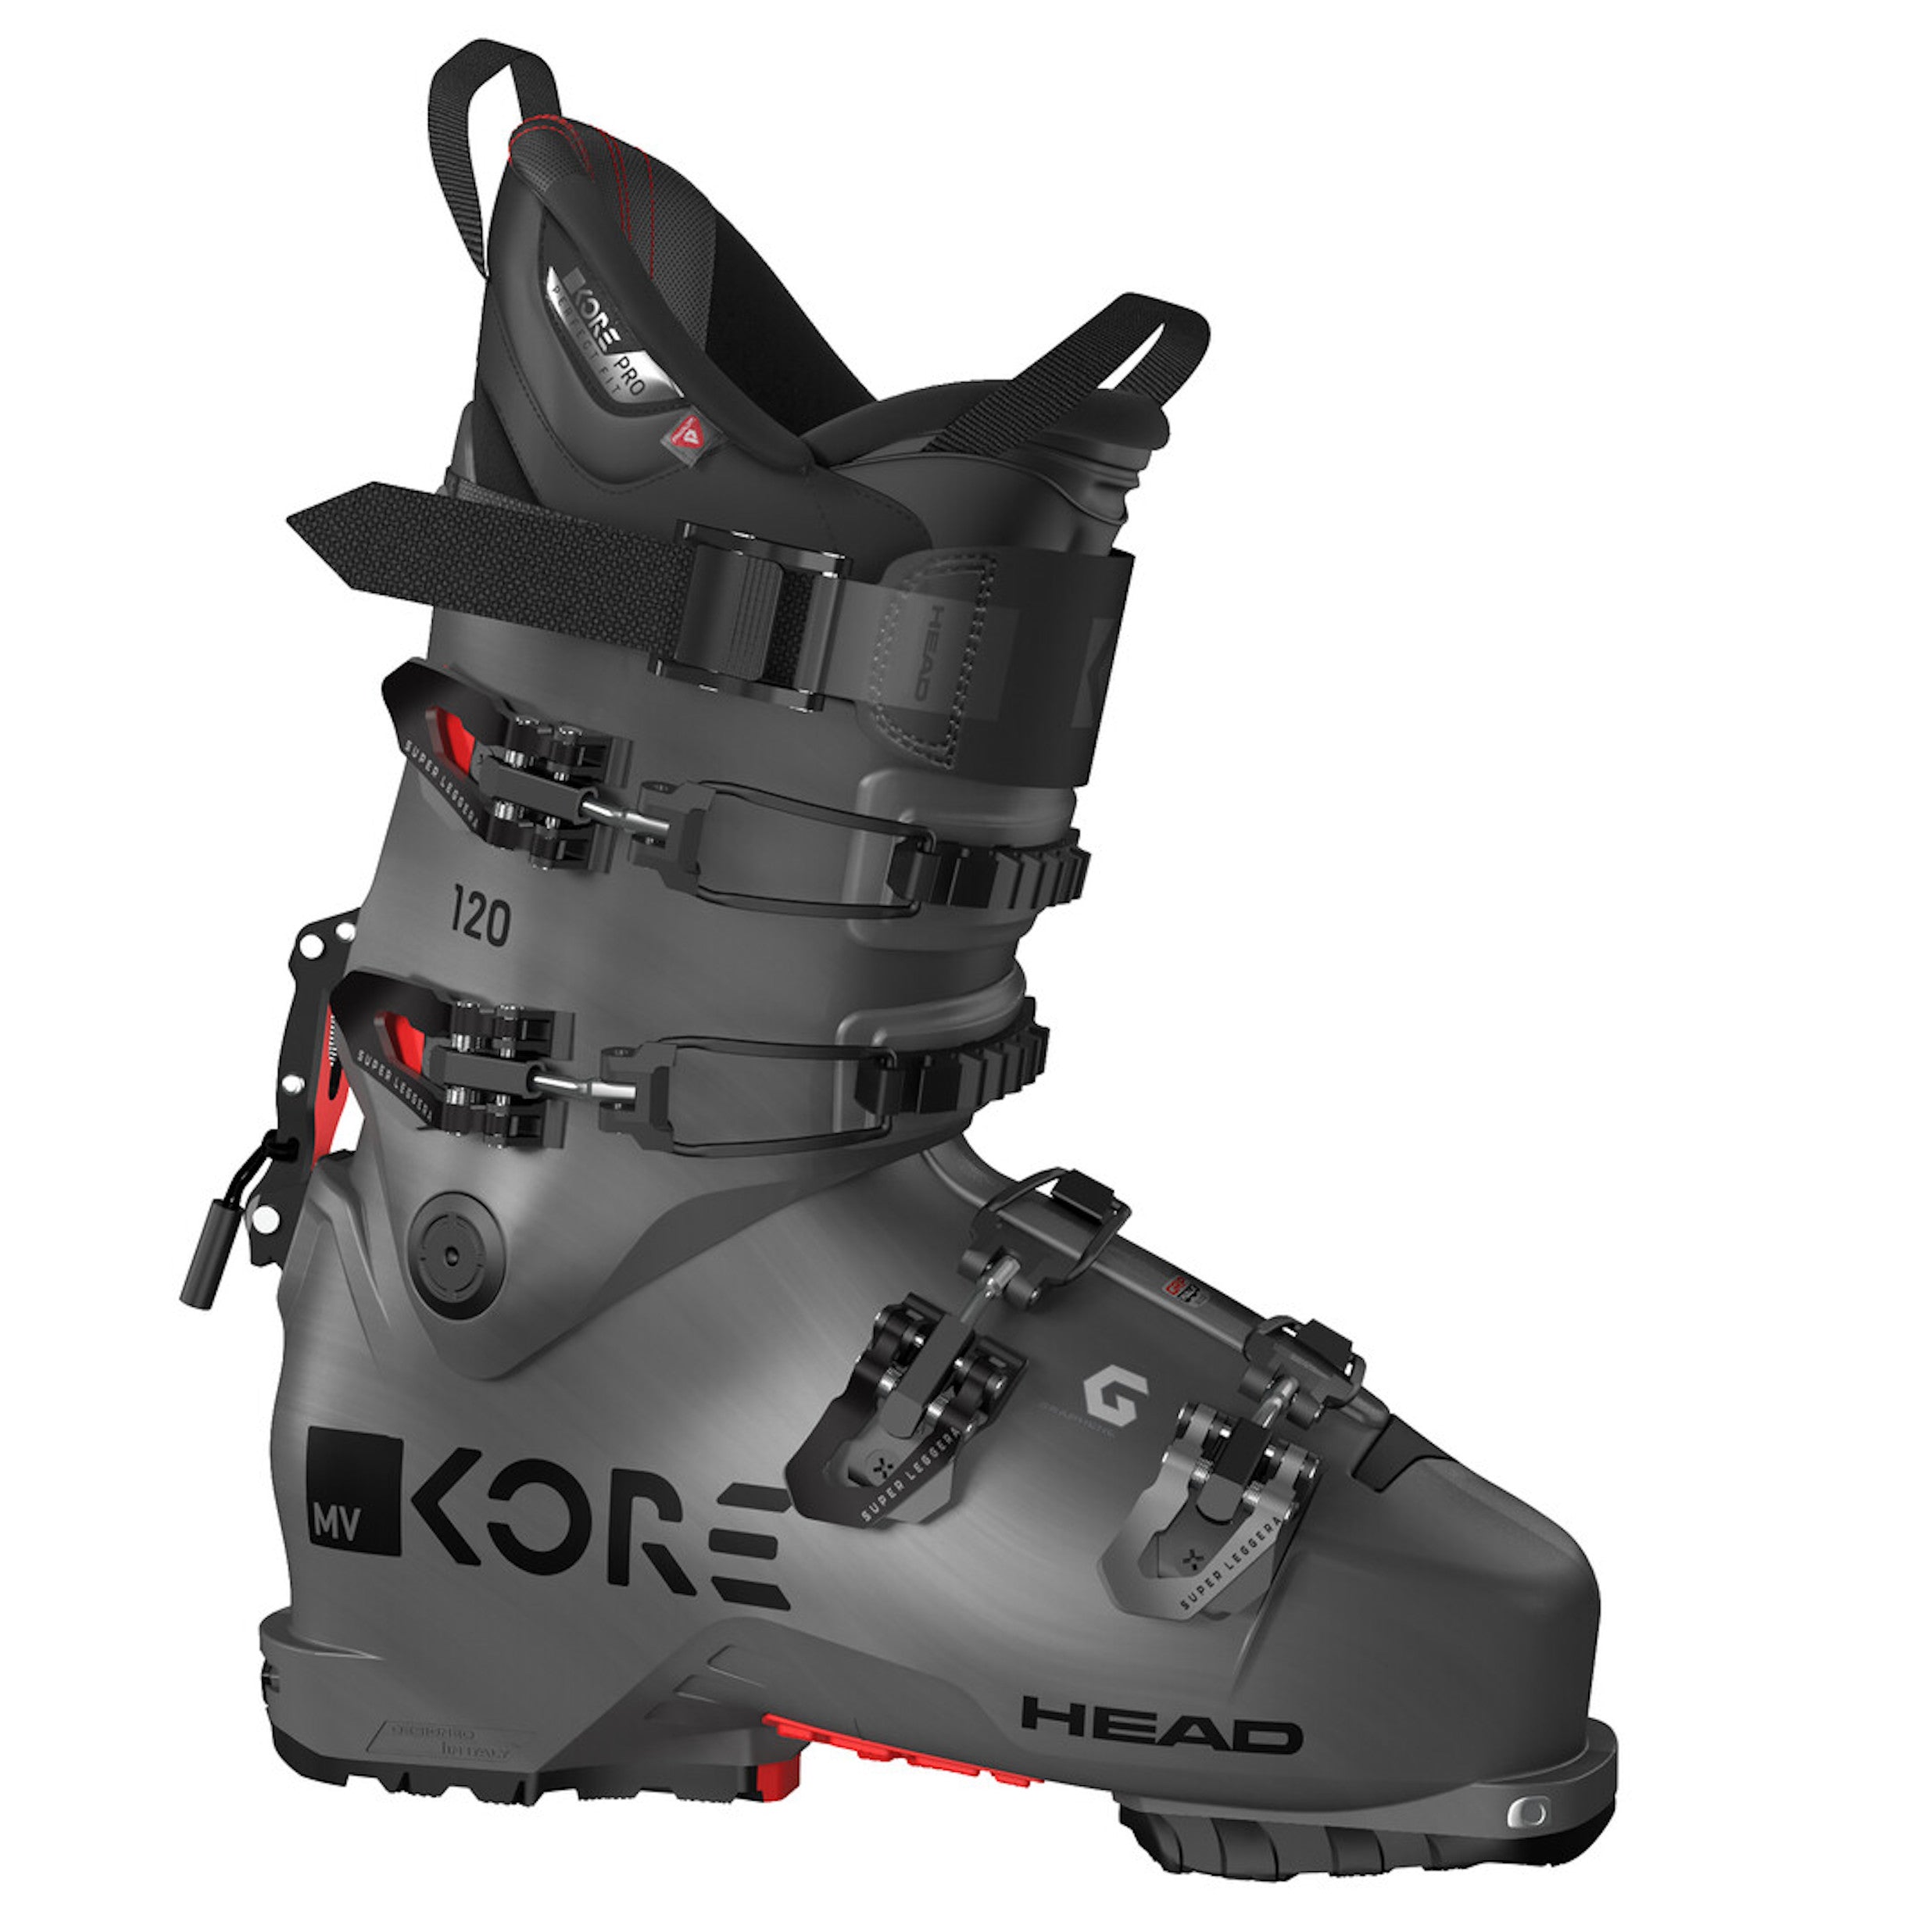 Men's Head Kore 120 ski boot, all dark grey with black shiny buckles, walk mode adjust in the back and red accents.